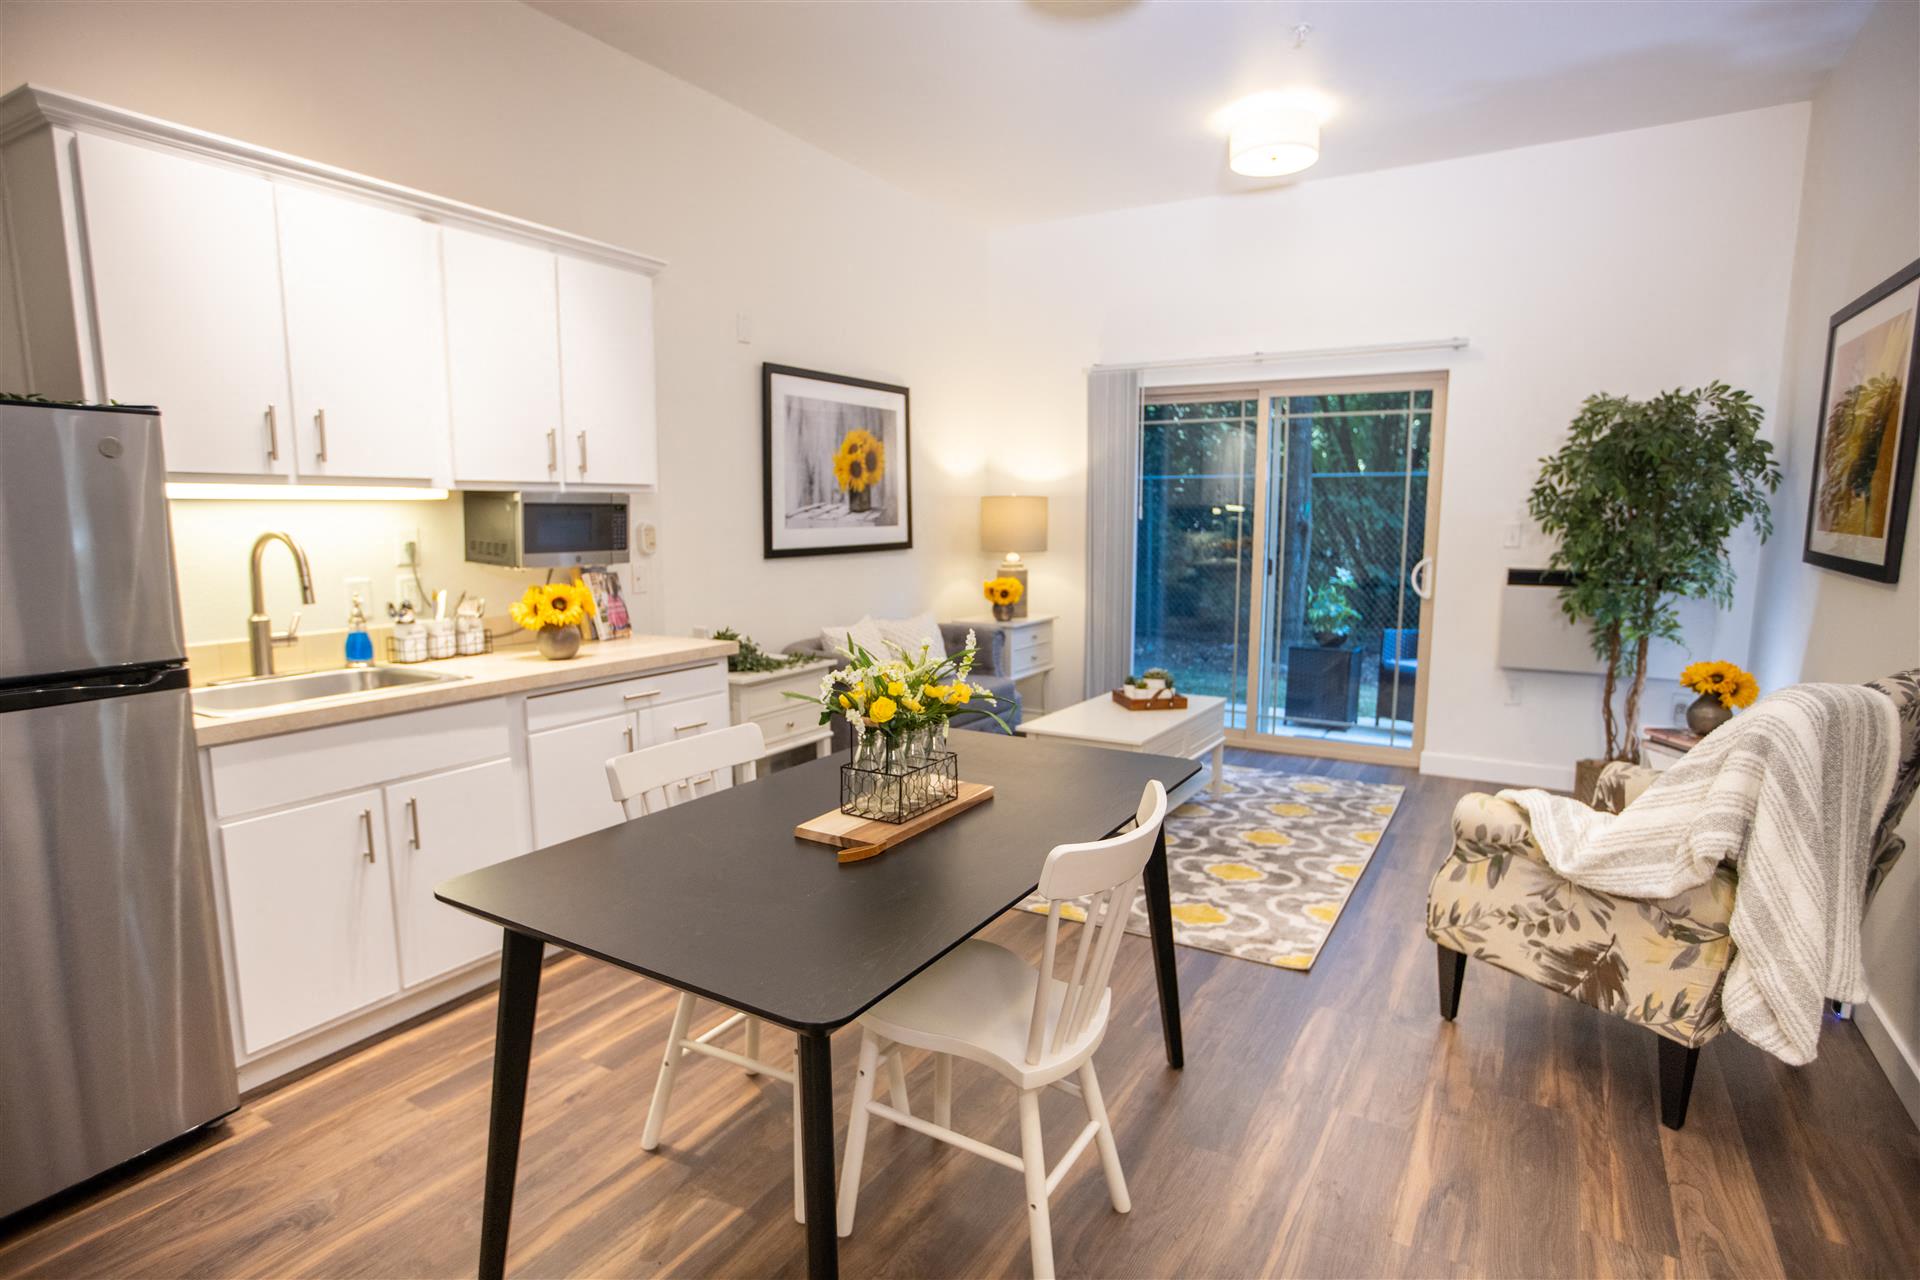 Kitchen and living space at Cogir of Vancouver, Vancouver, 98682